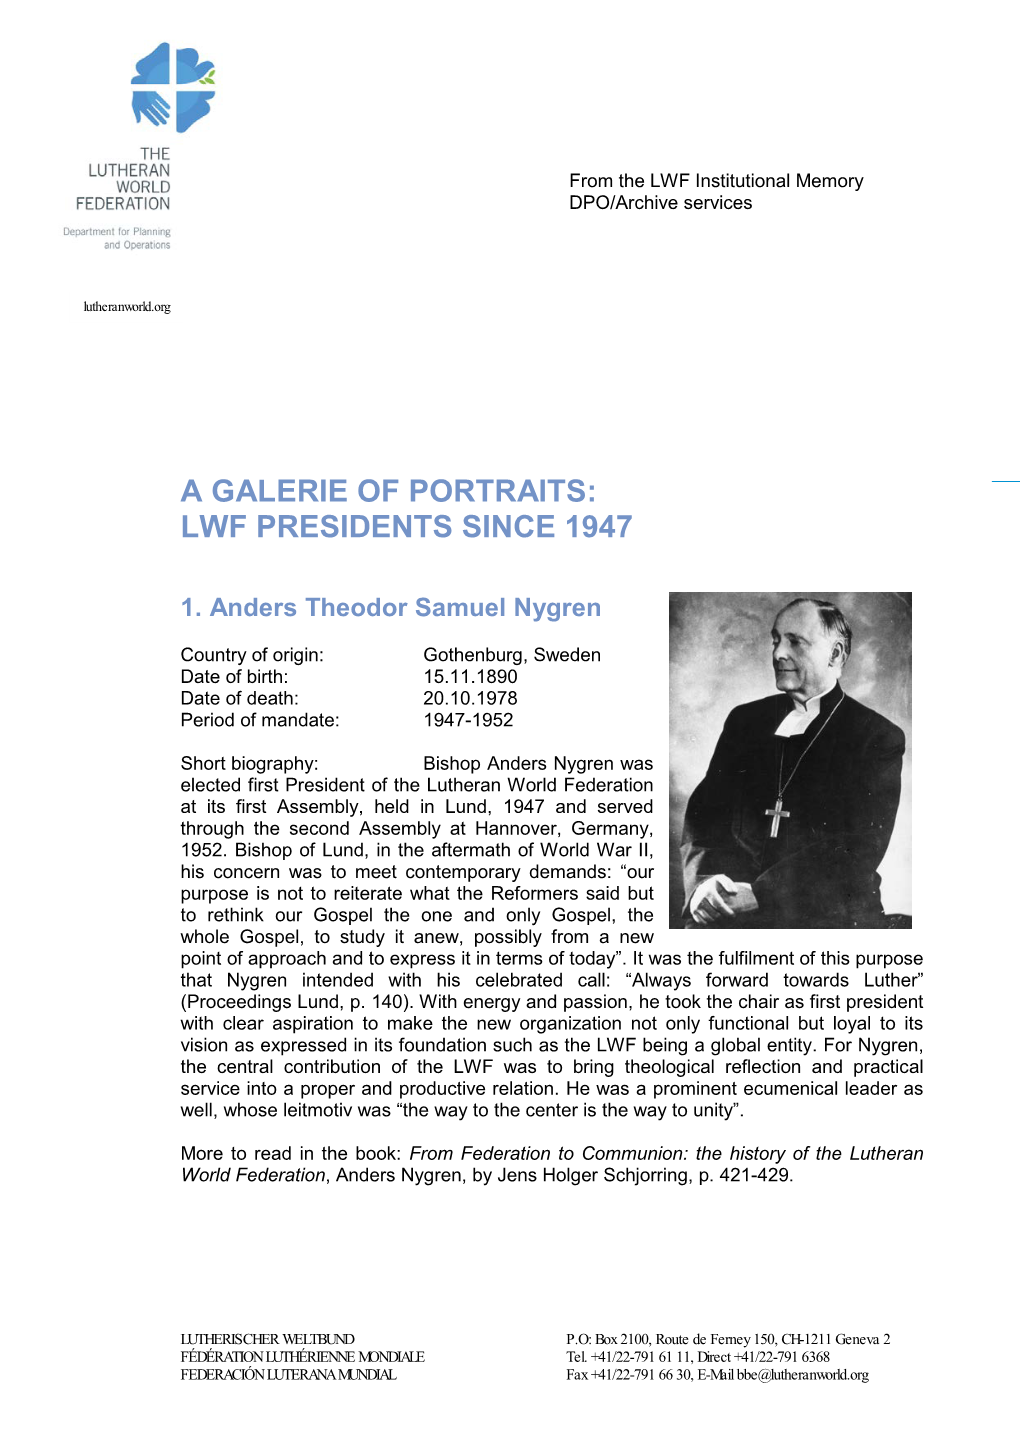 A Galerie of Portraits: Lwf Presidents Since 1947